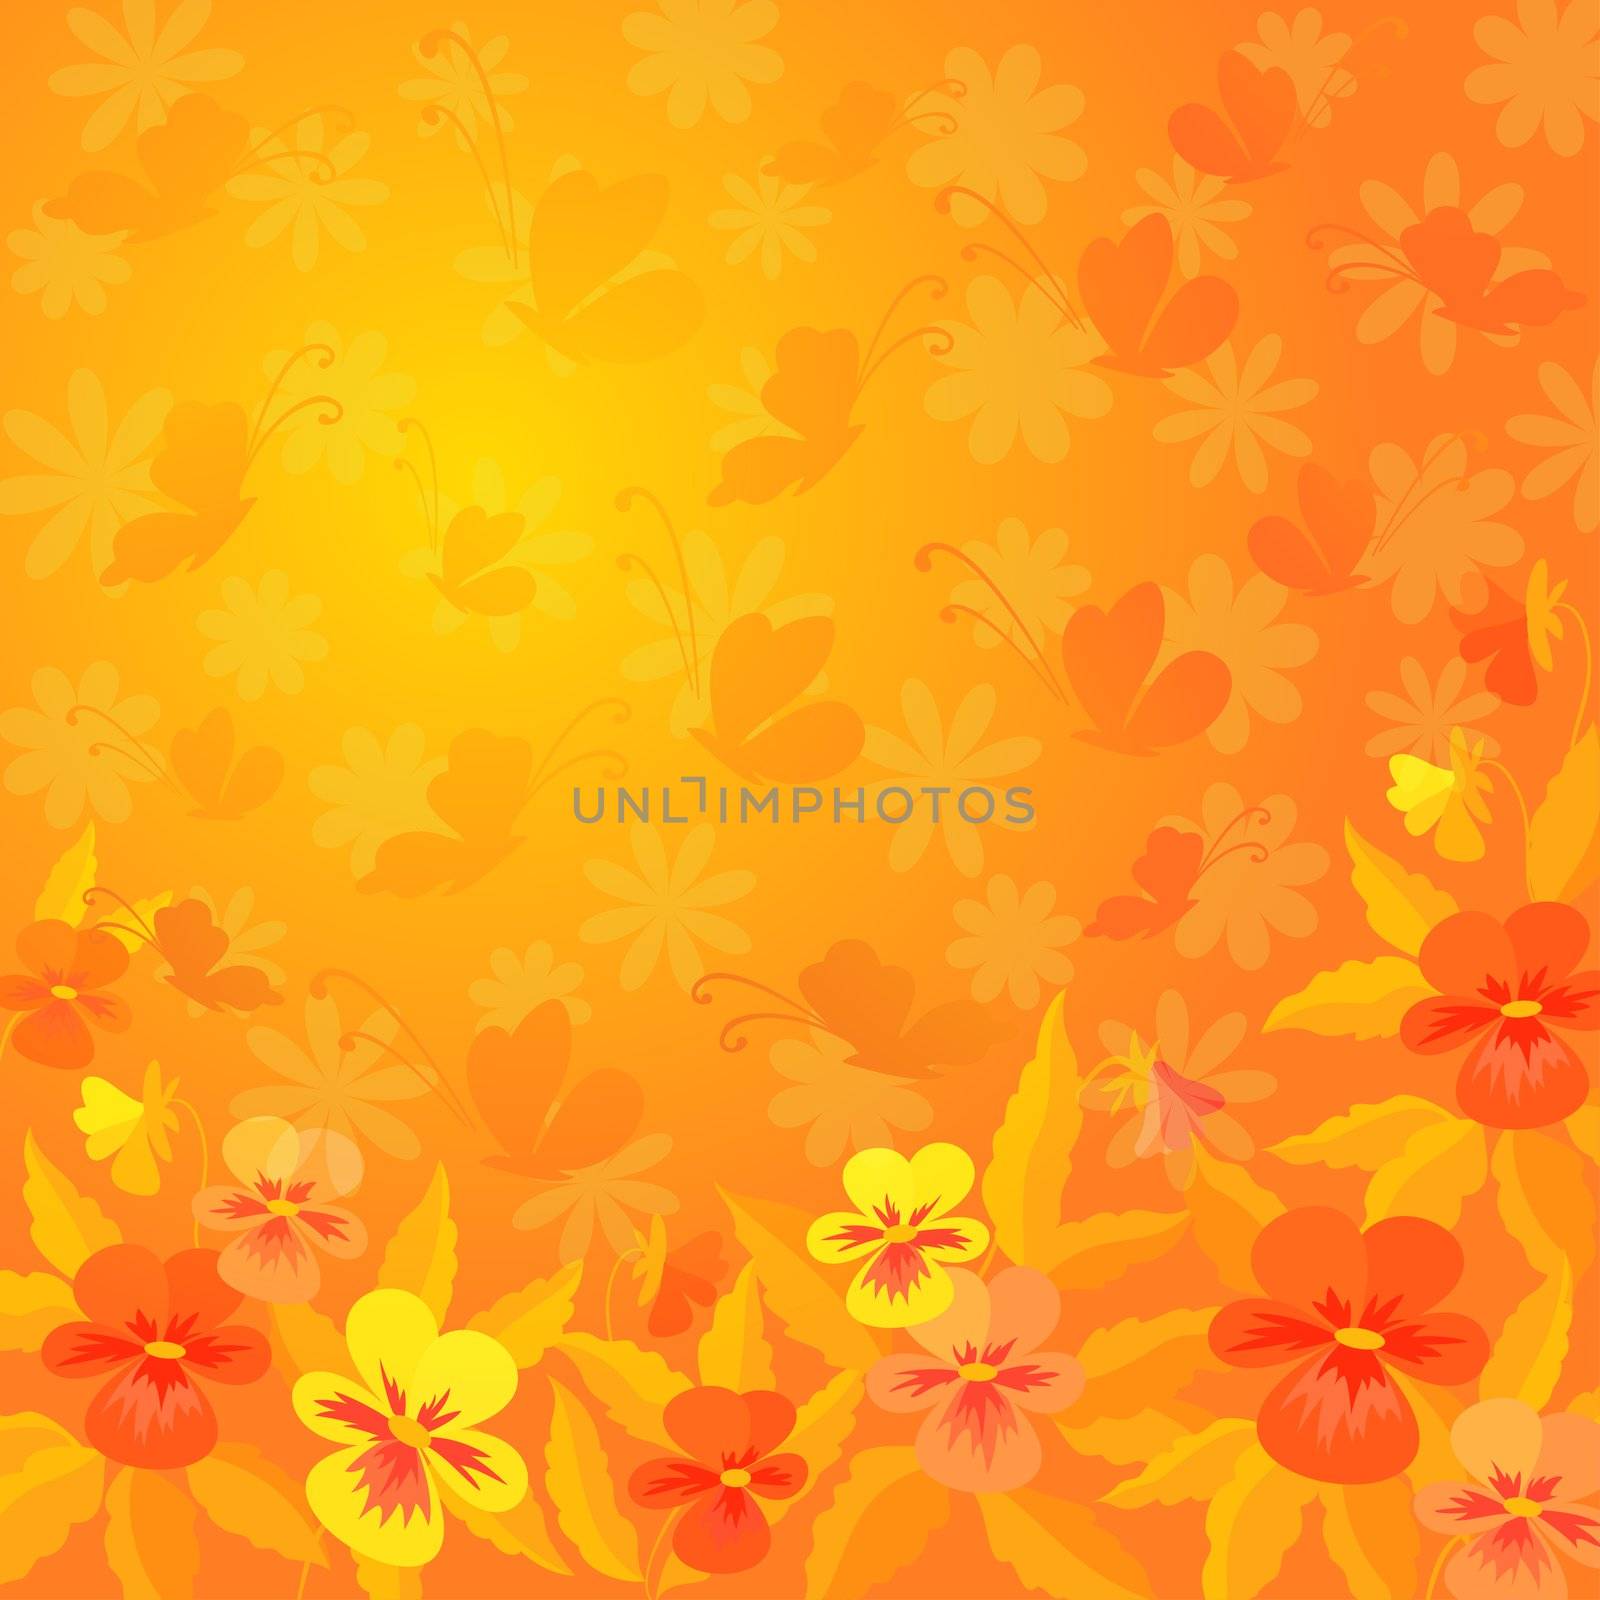 Abstract red, orange, and yellow background: pansies flowers and butterflies silhouettes